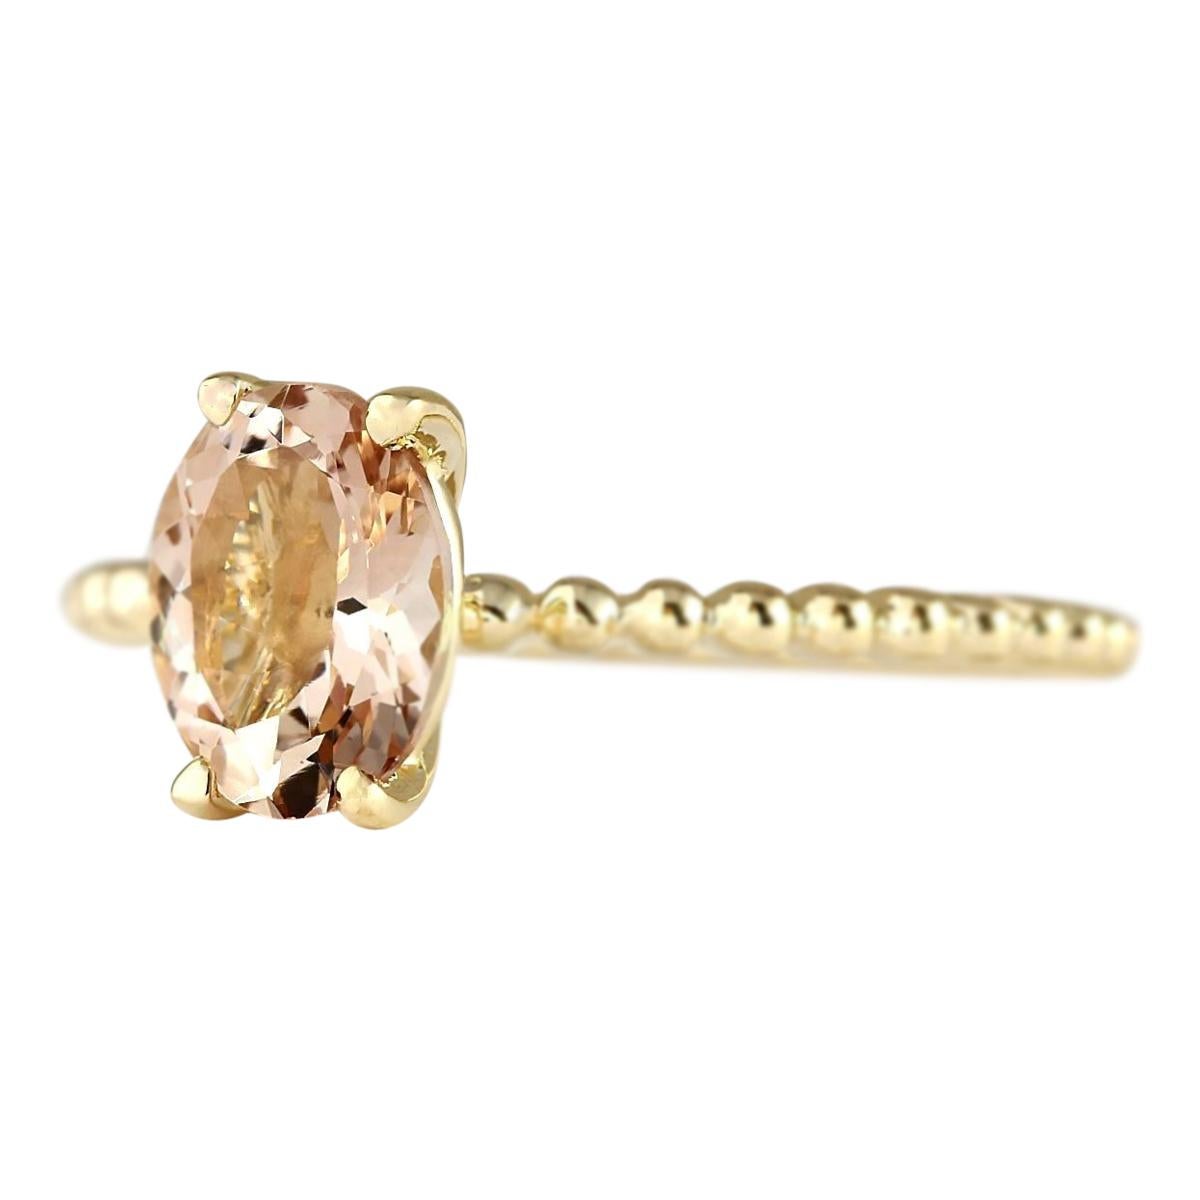 Stamped: 14K Yellow Gold
Total Ring Weight: 1.8 Grams
Total Natural Morganite Weight is 1.10 Carat
Color: Peach
Face Measures: 7.00x5.00 mm
Sku: [703235W]